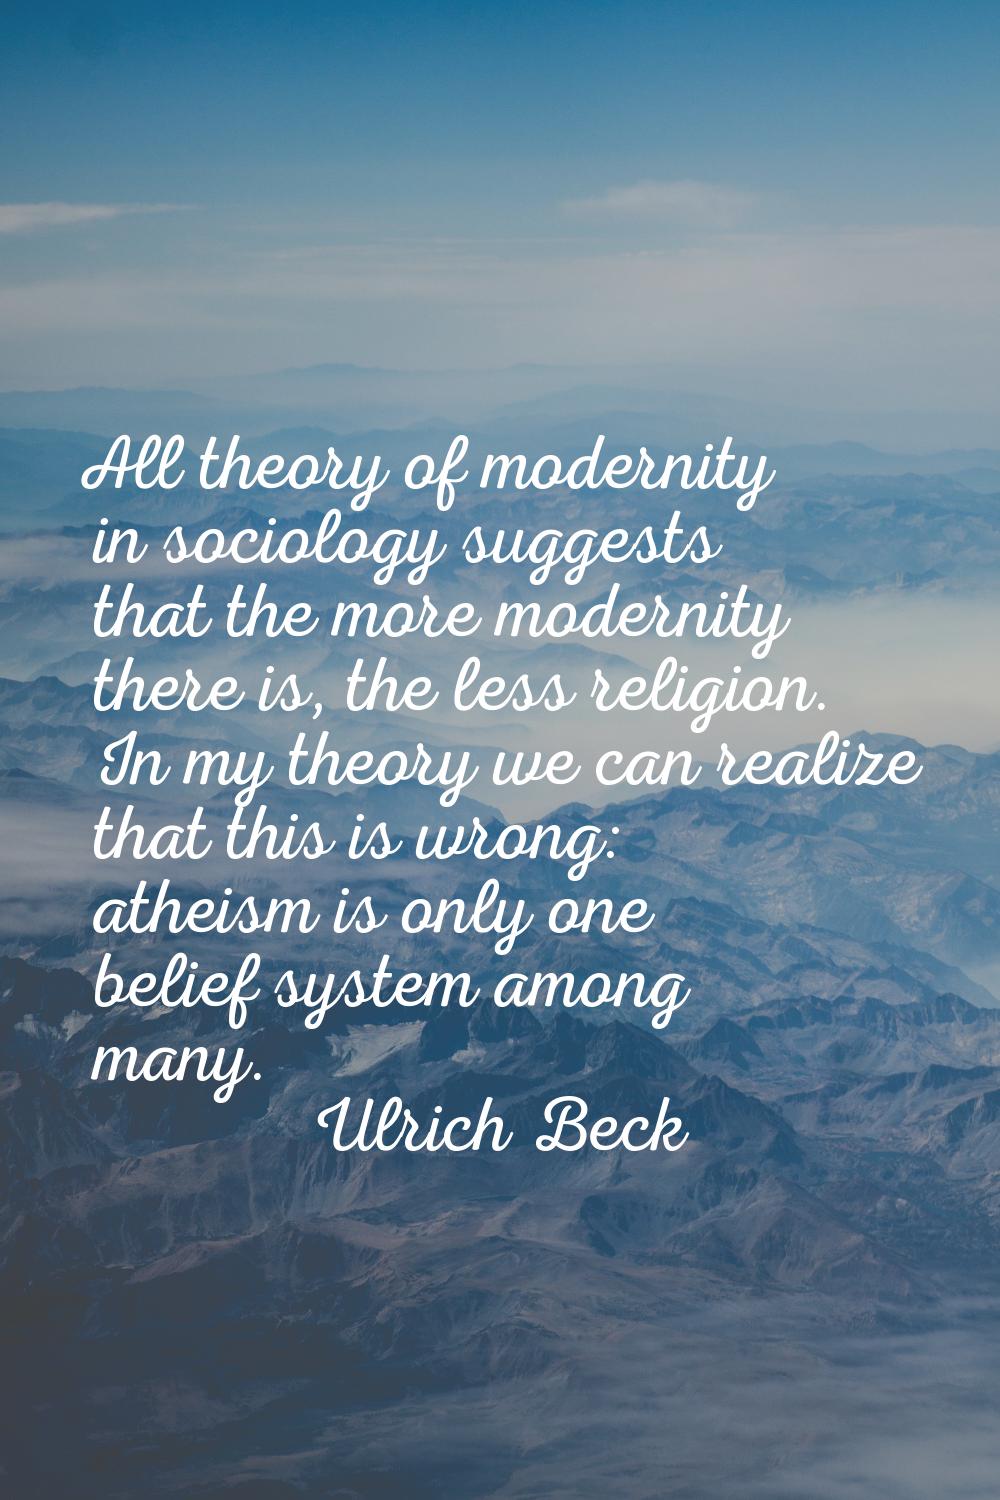 All theory of modernity in sociology suggests that the more modernity there is, the less religion. 